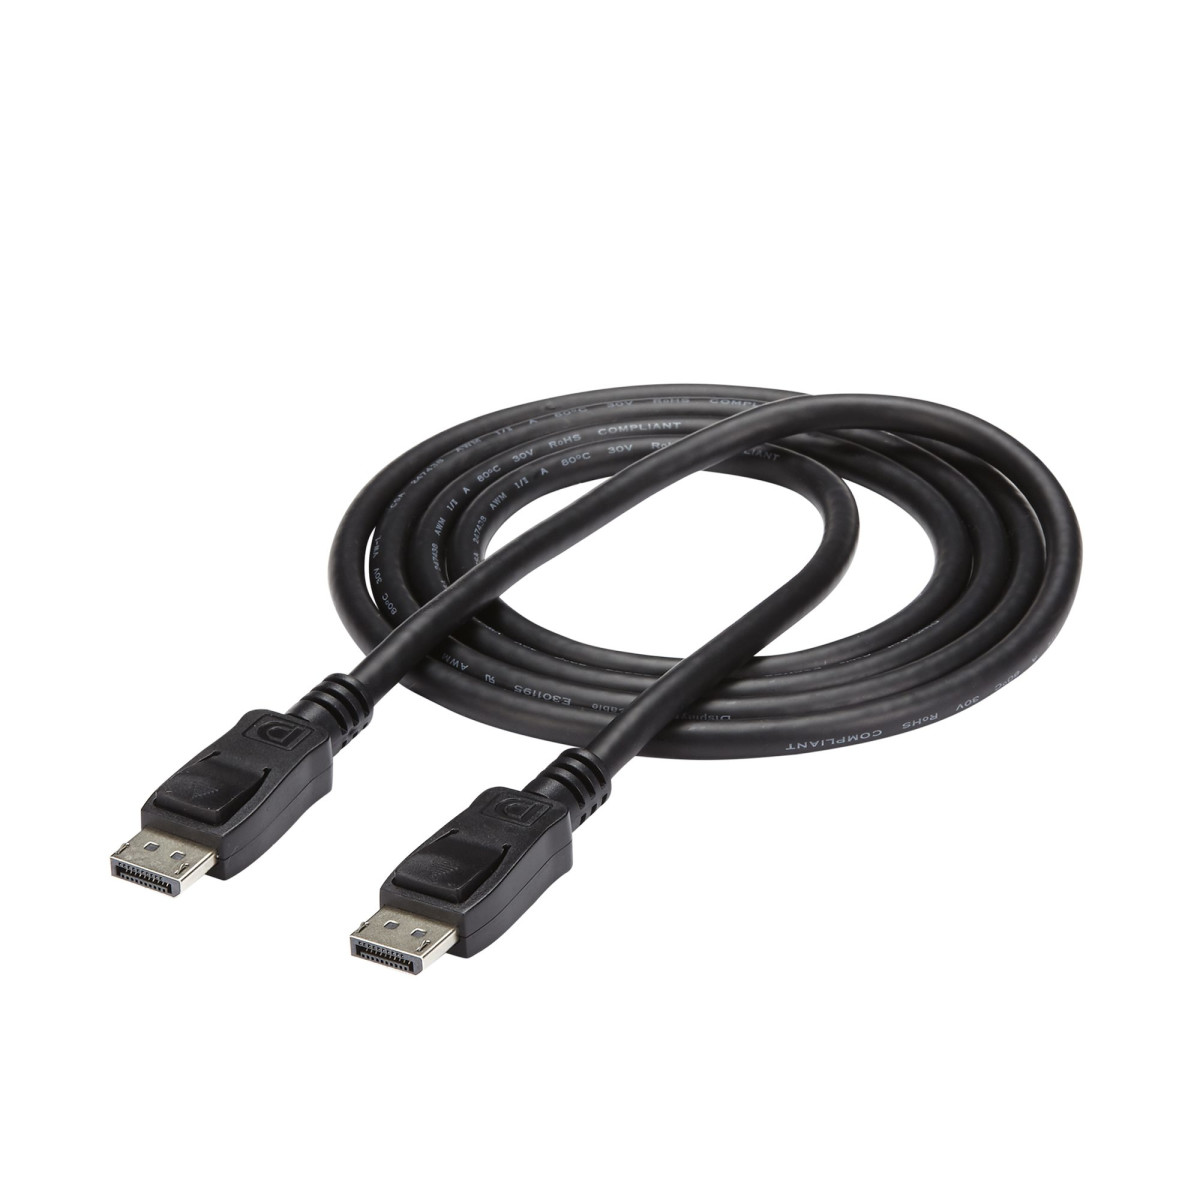 2m DisplayPort Cable with Latches - M/M